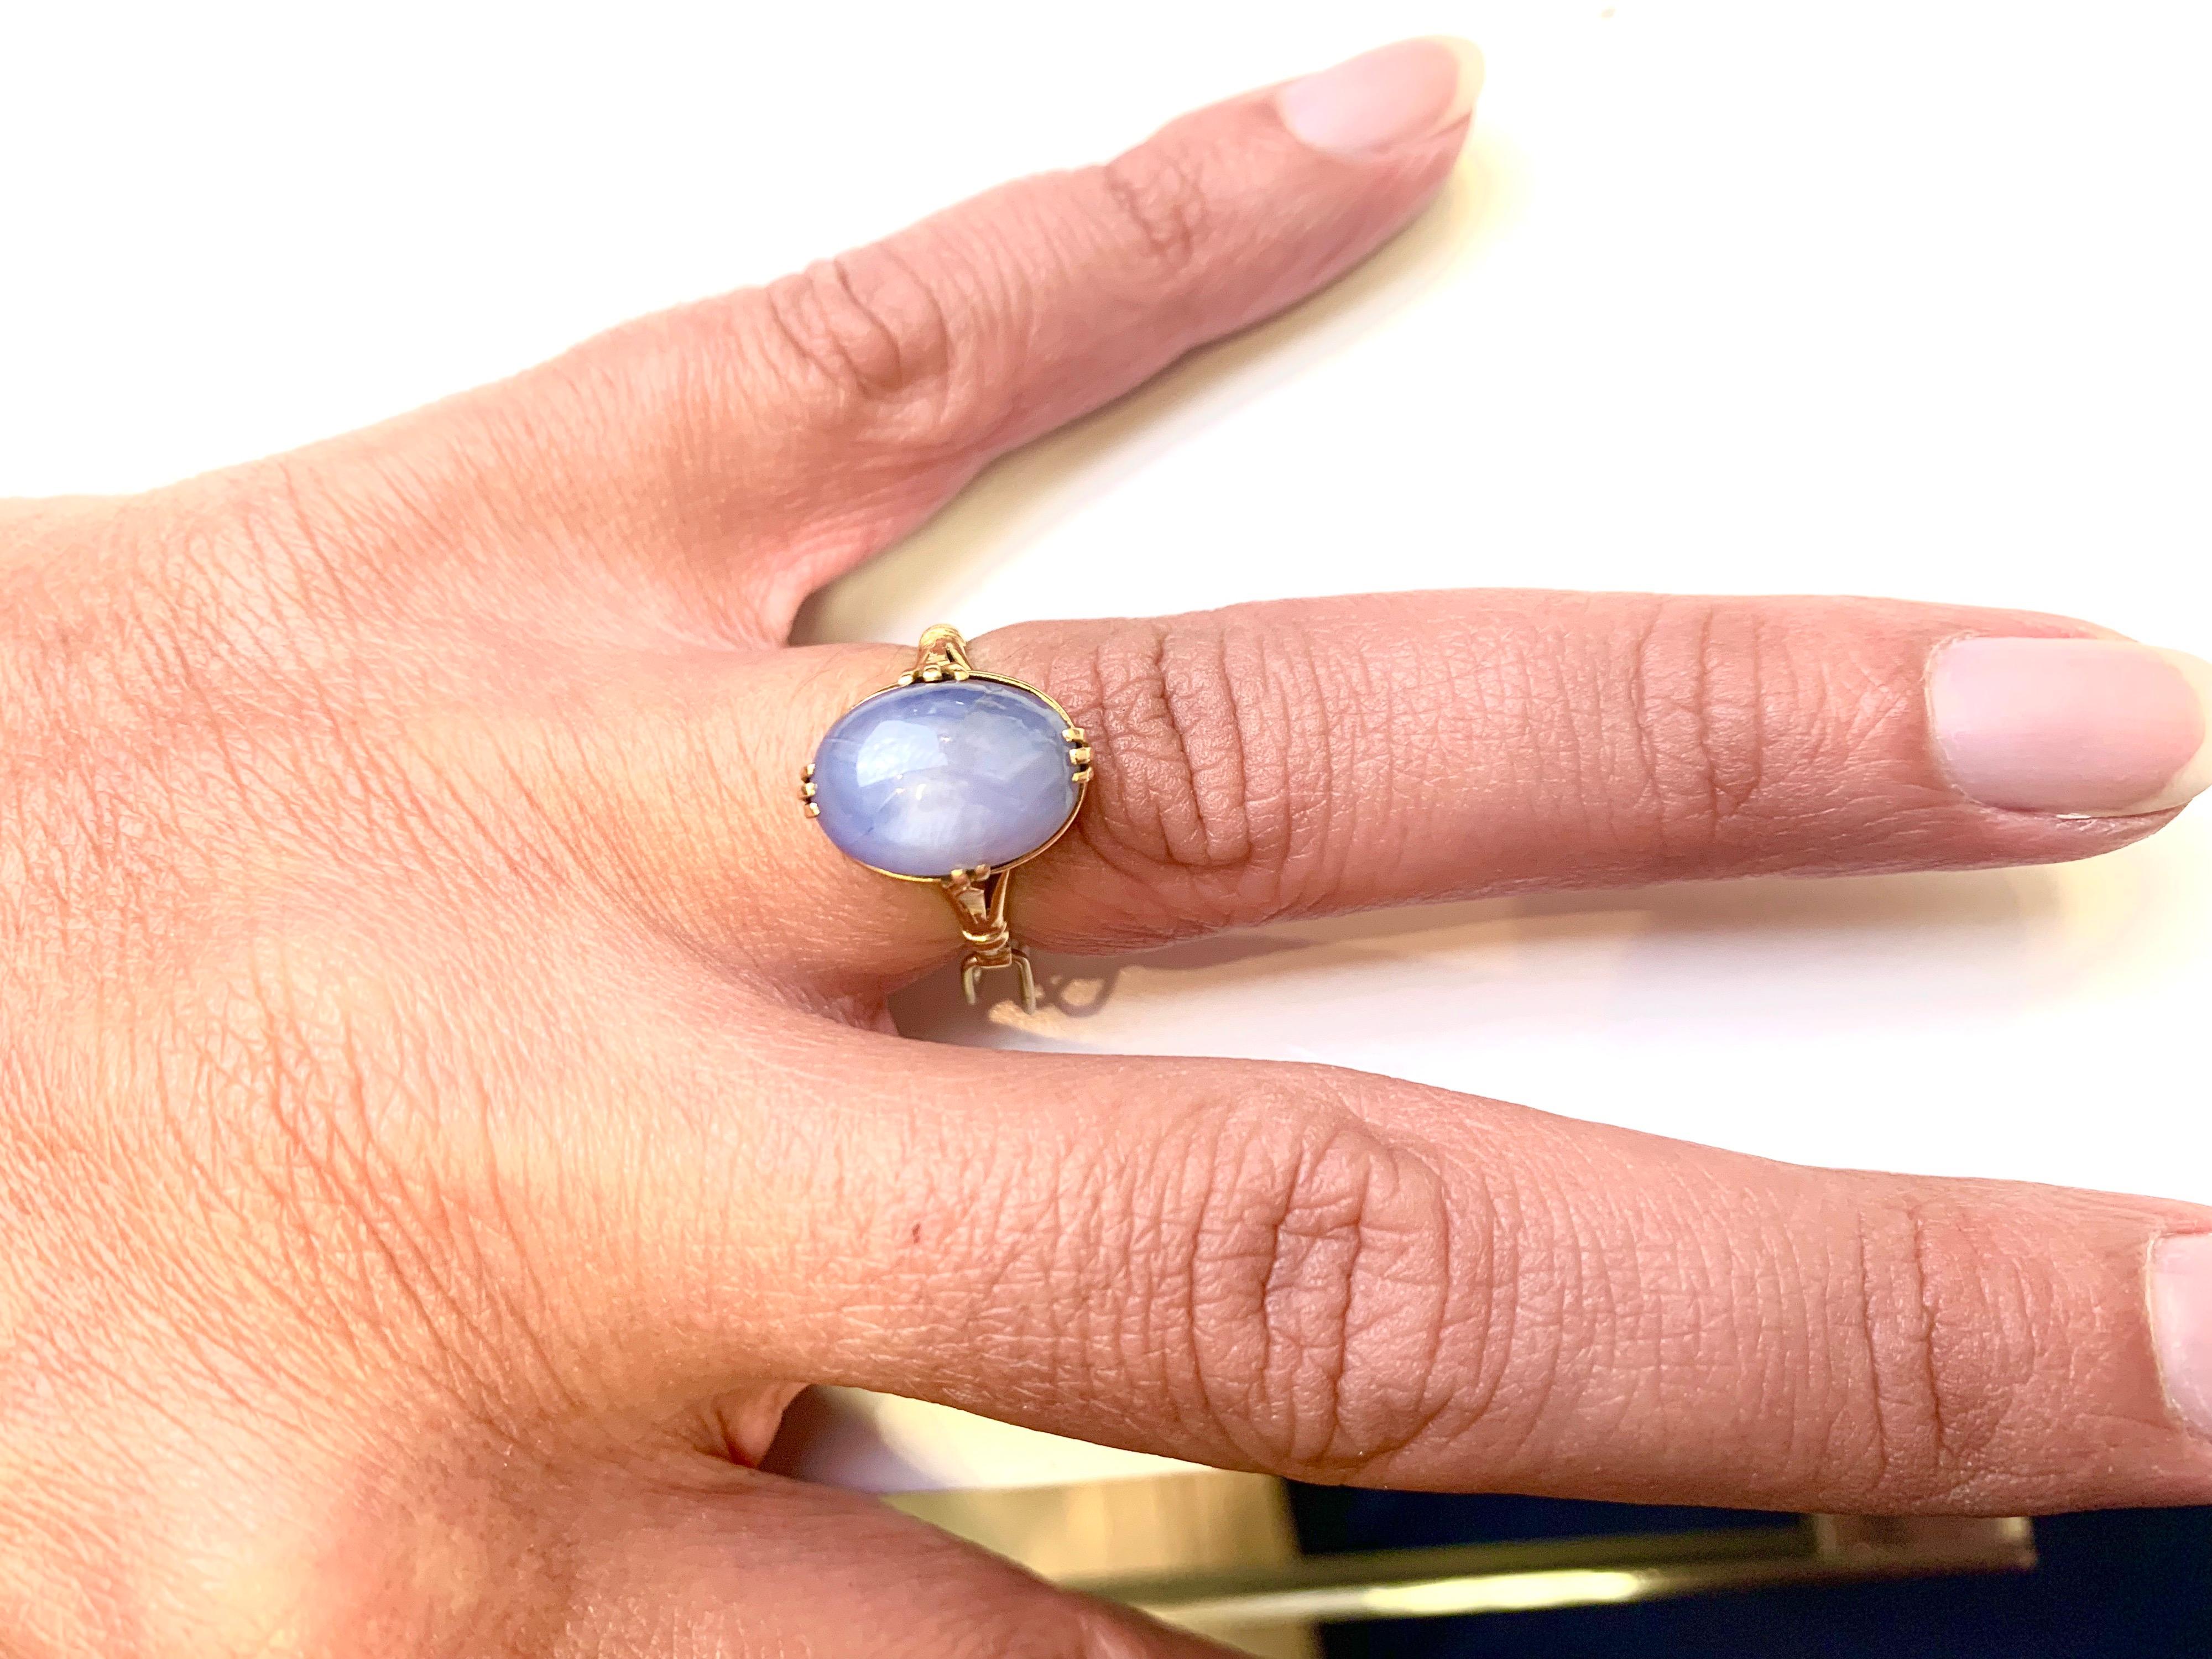 Oval Cut Victorian Lavender Periwinkle 11 Carat Star Sapphire Ring